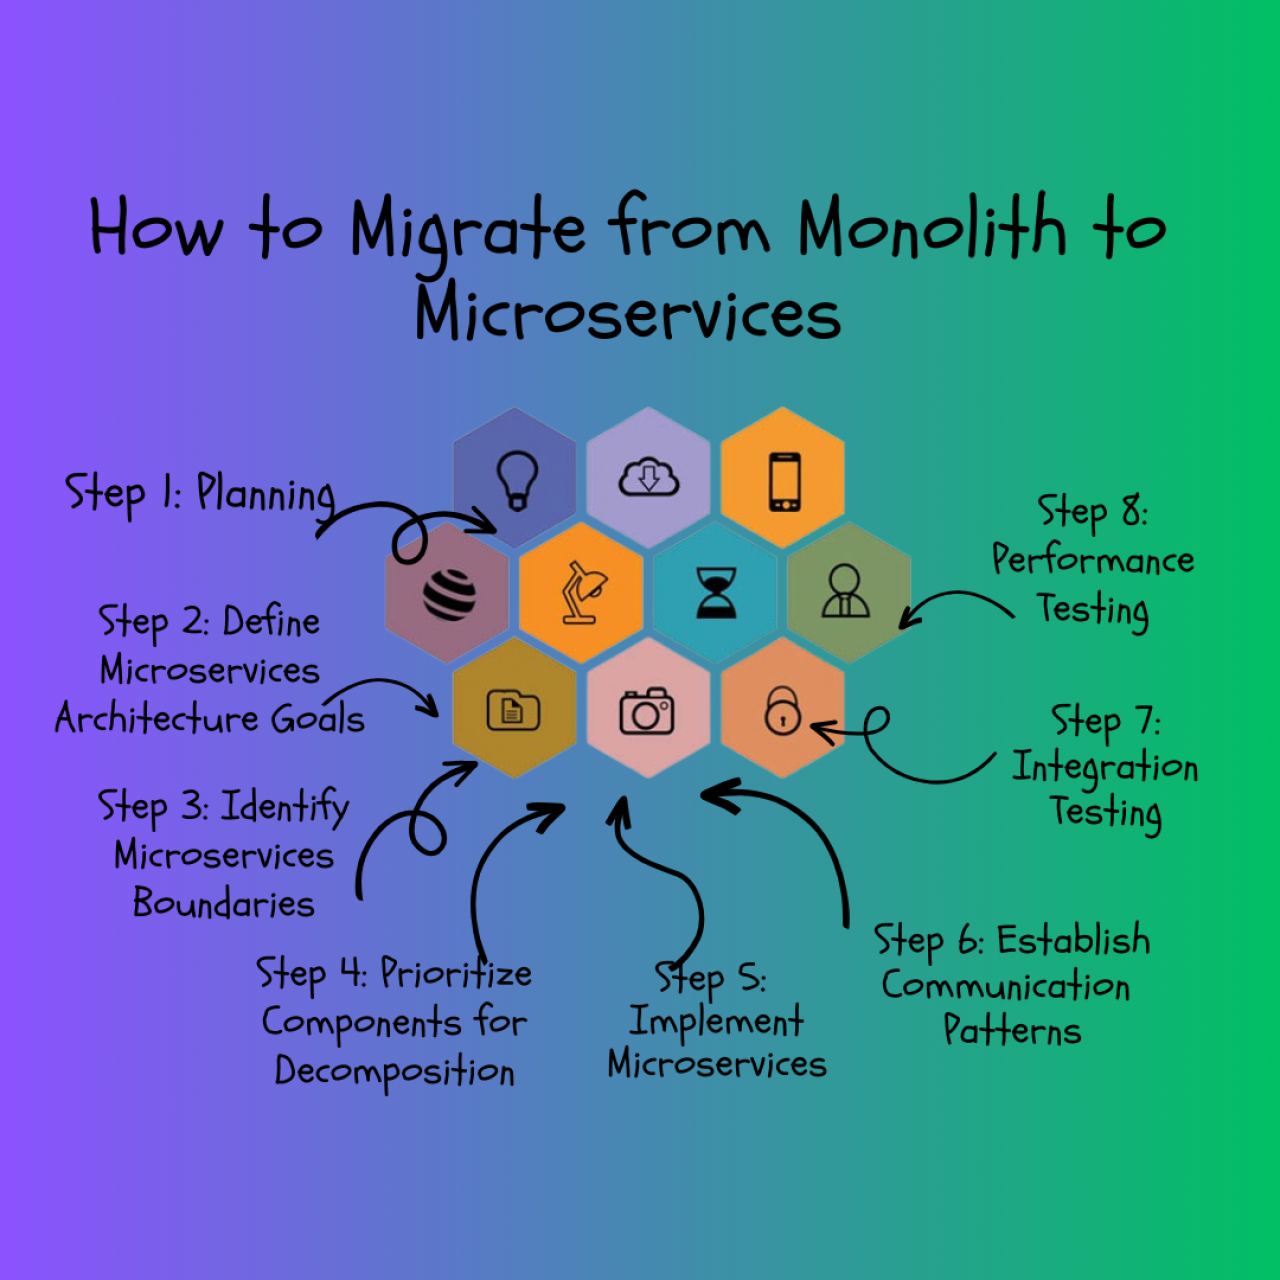 How to Migrate from Monolith to Microservices.